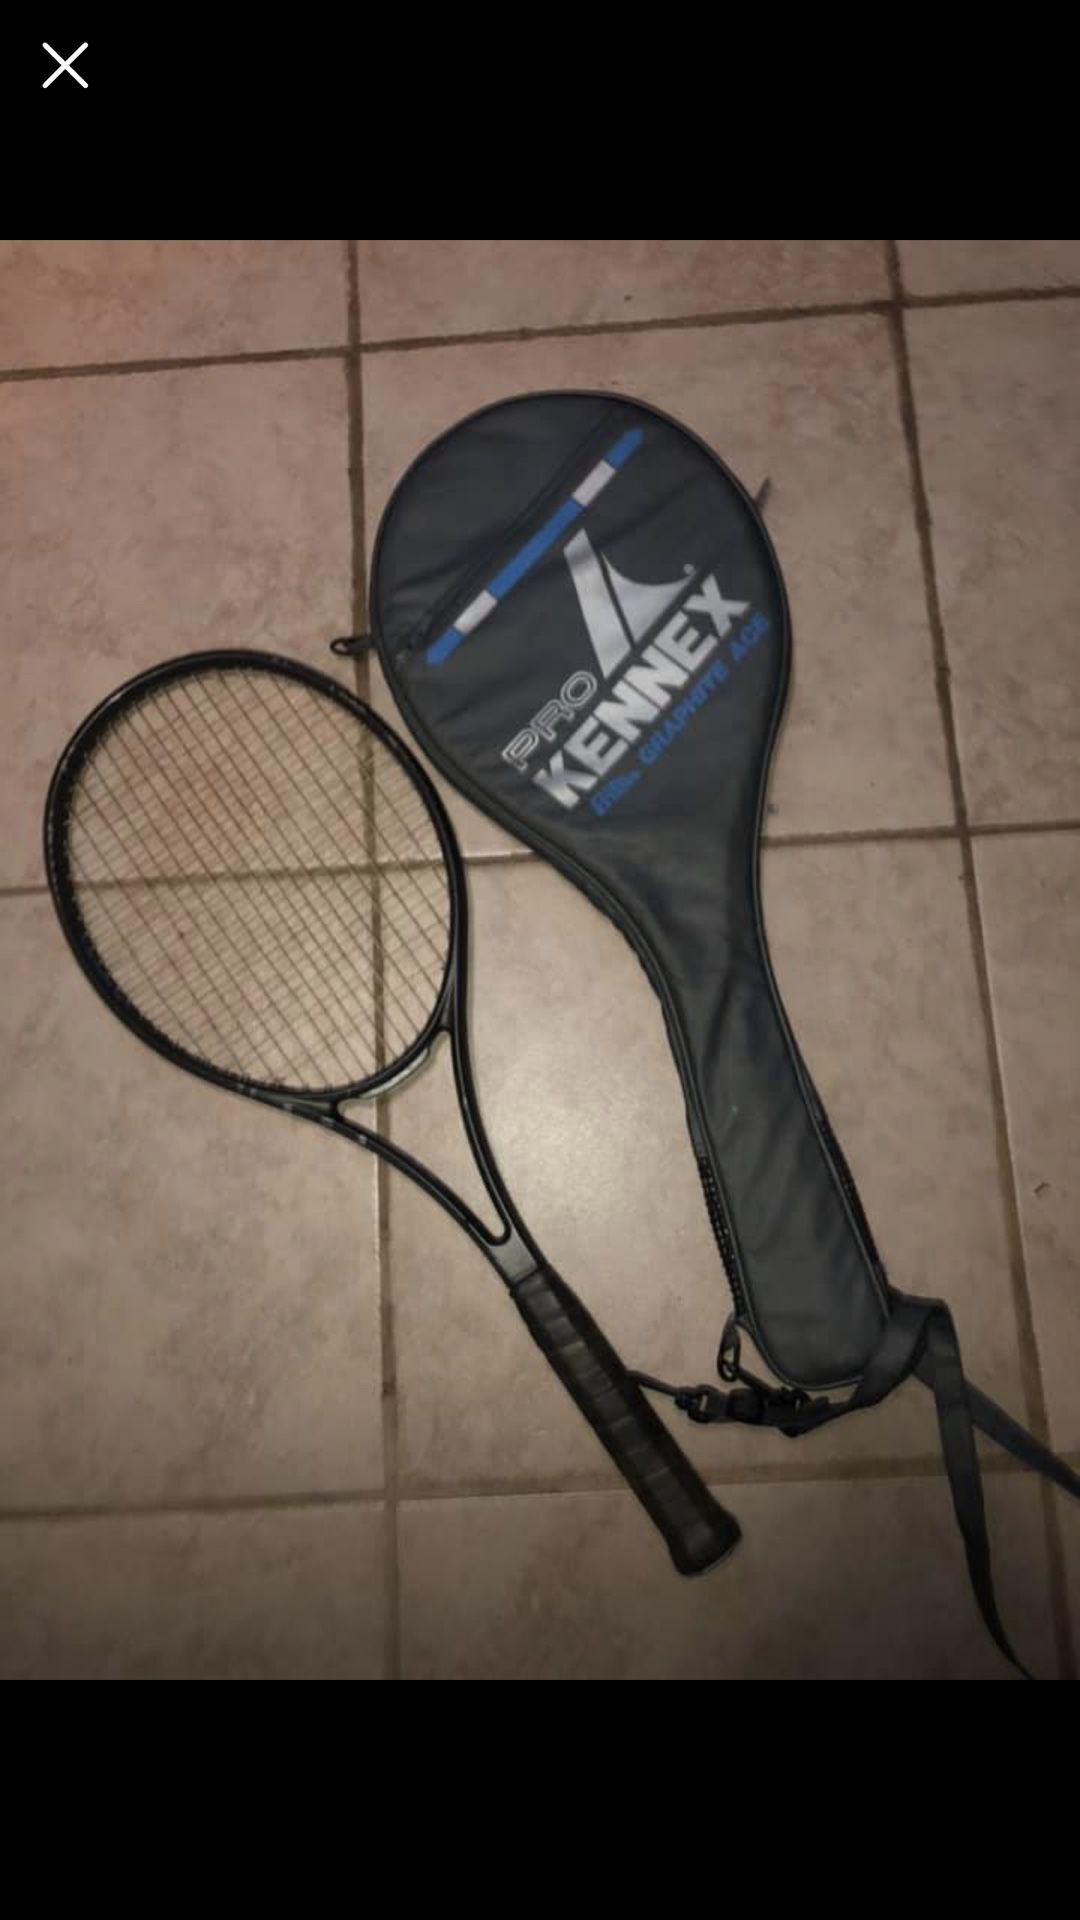 Tennis racket with pouch